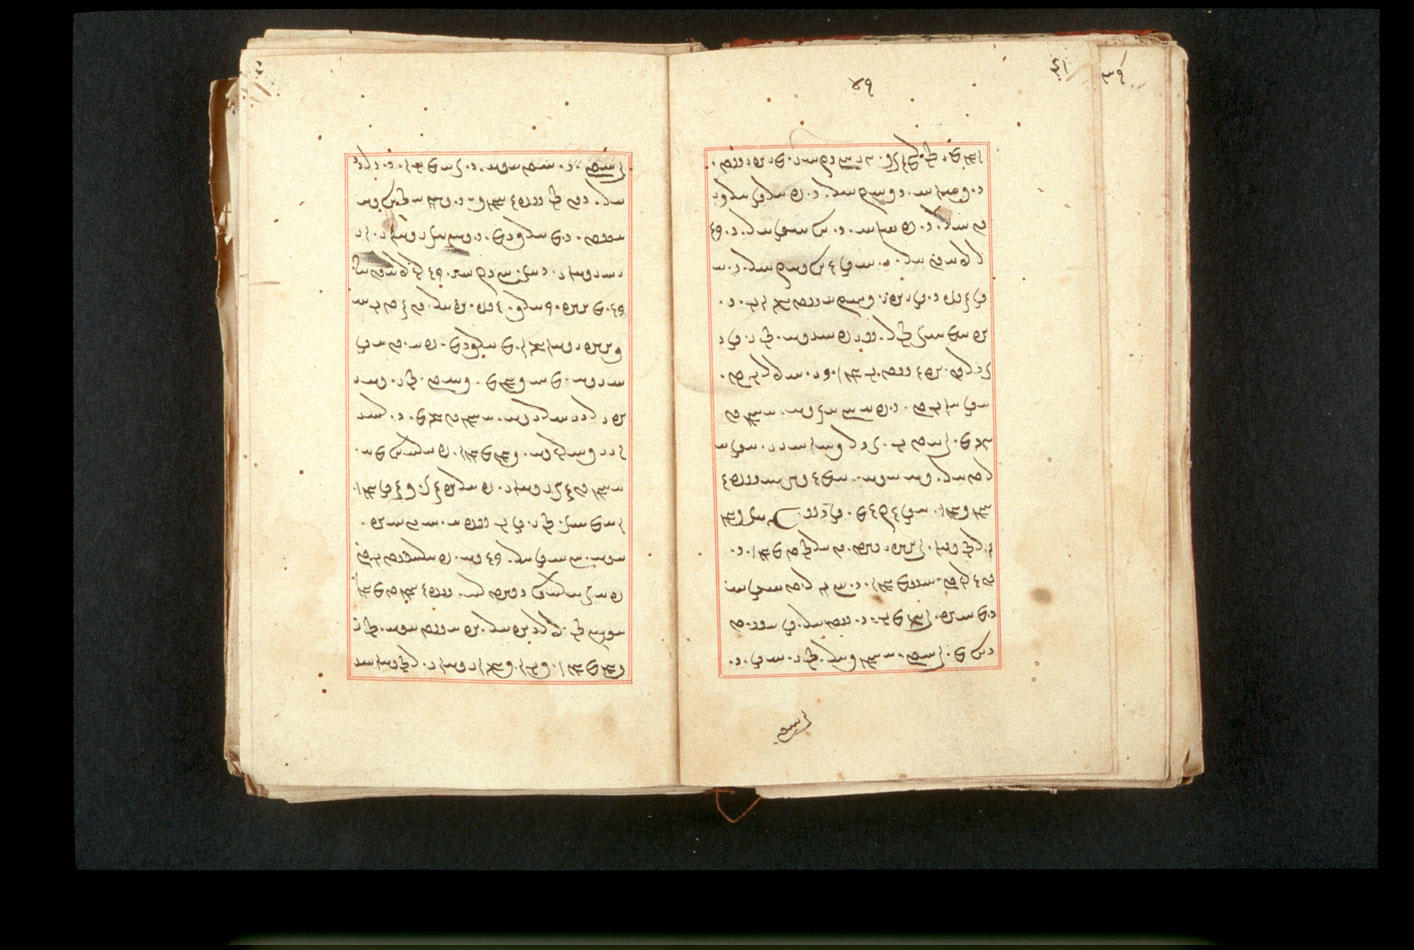 Folios 41v (right) and 42r (left)